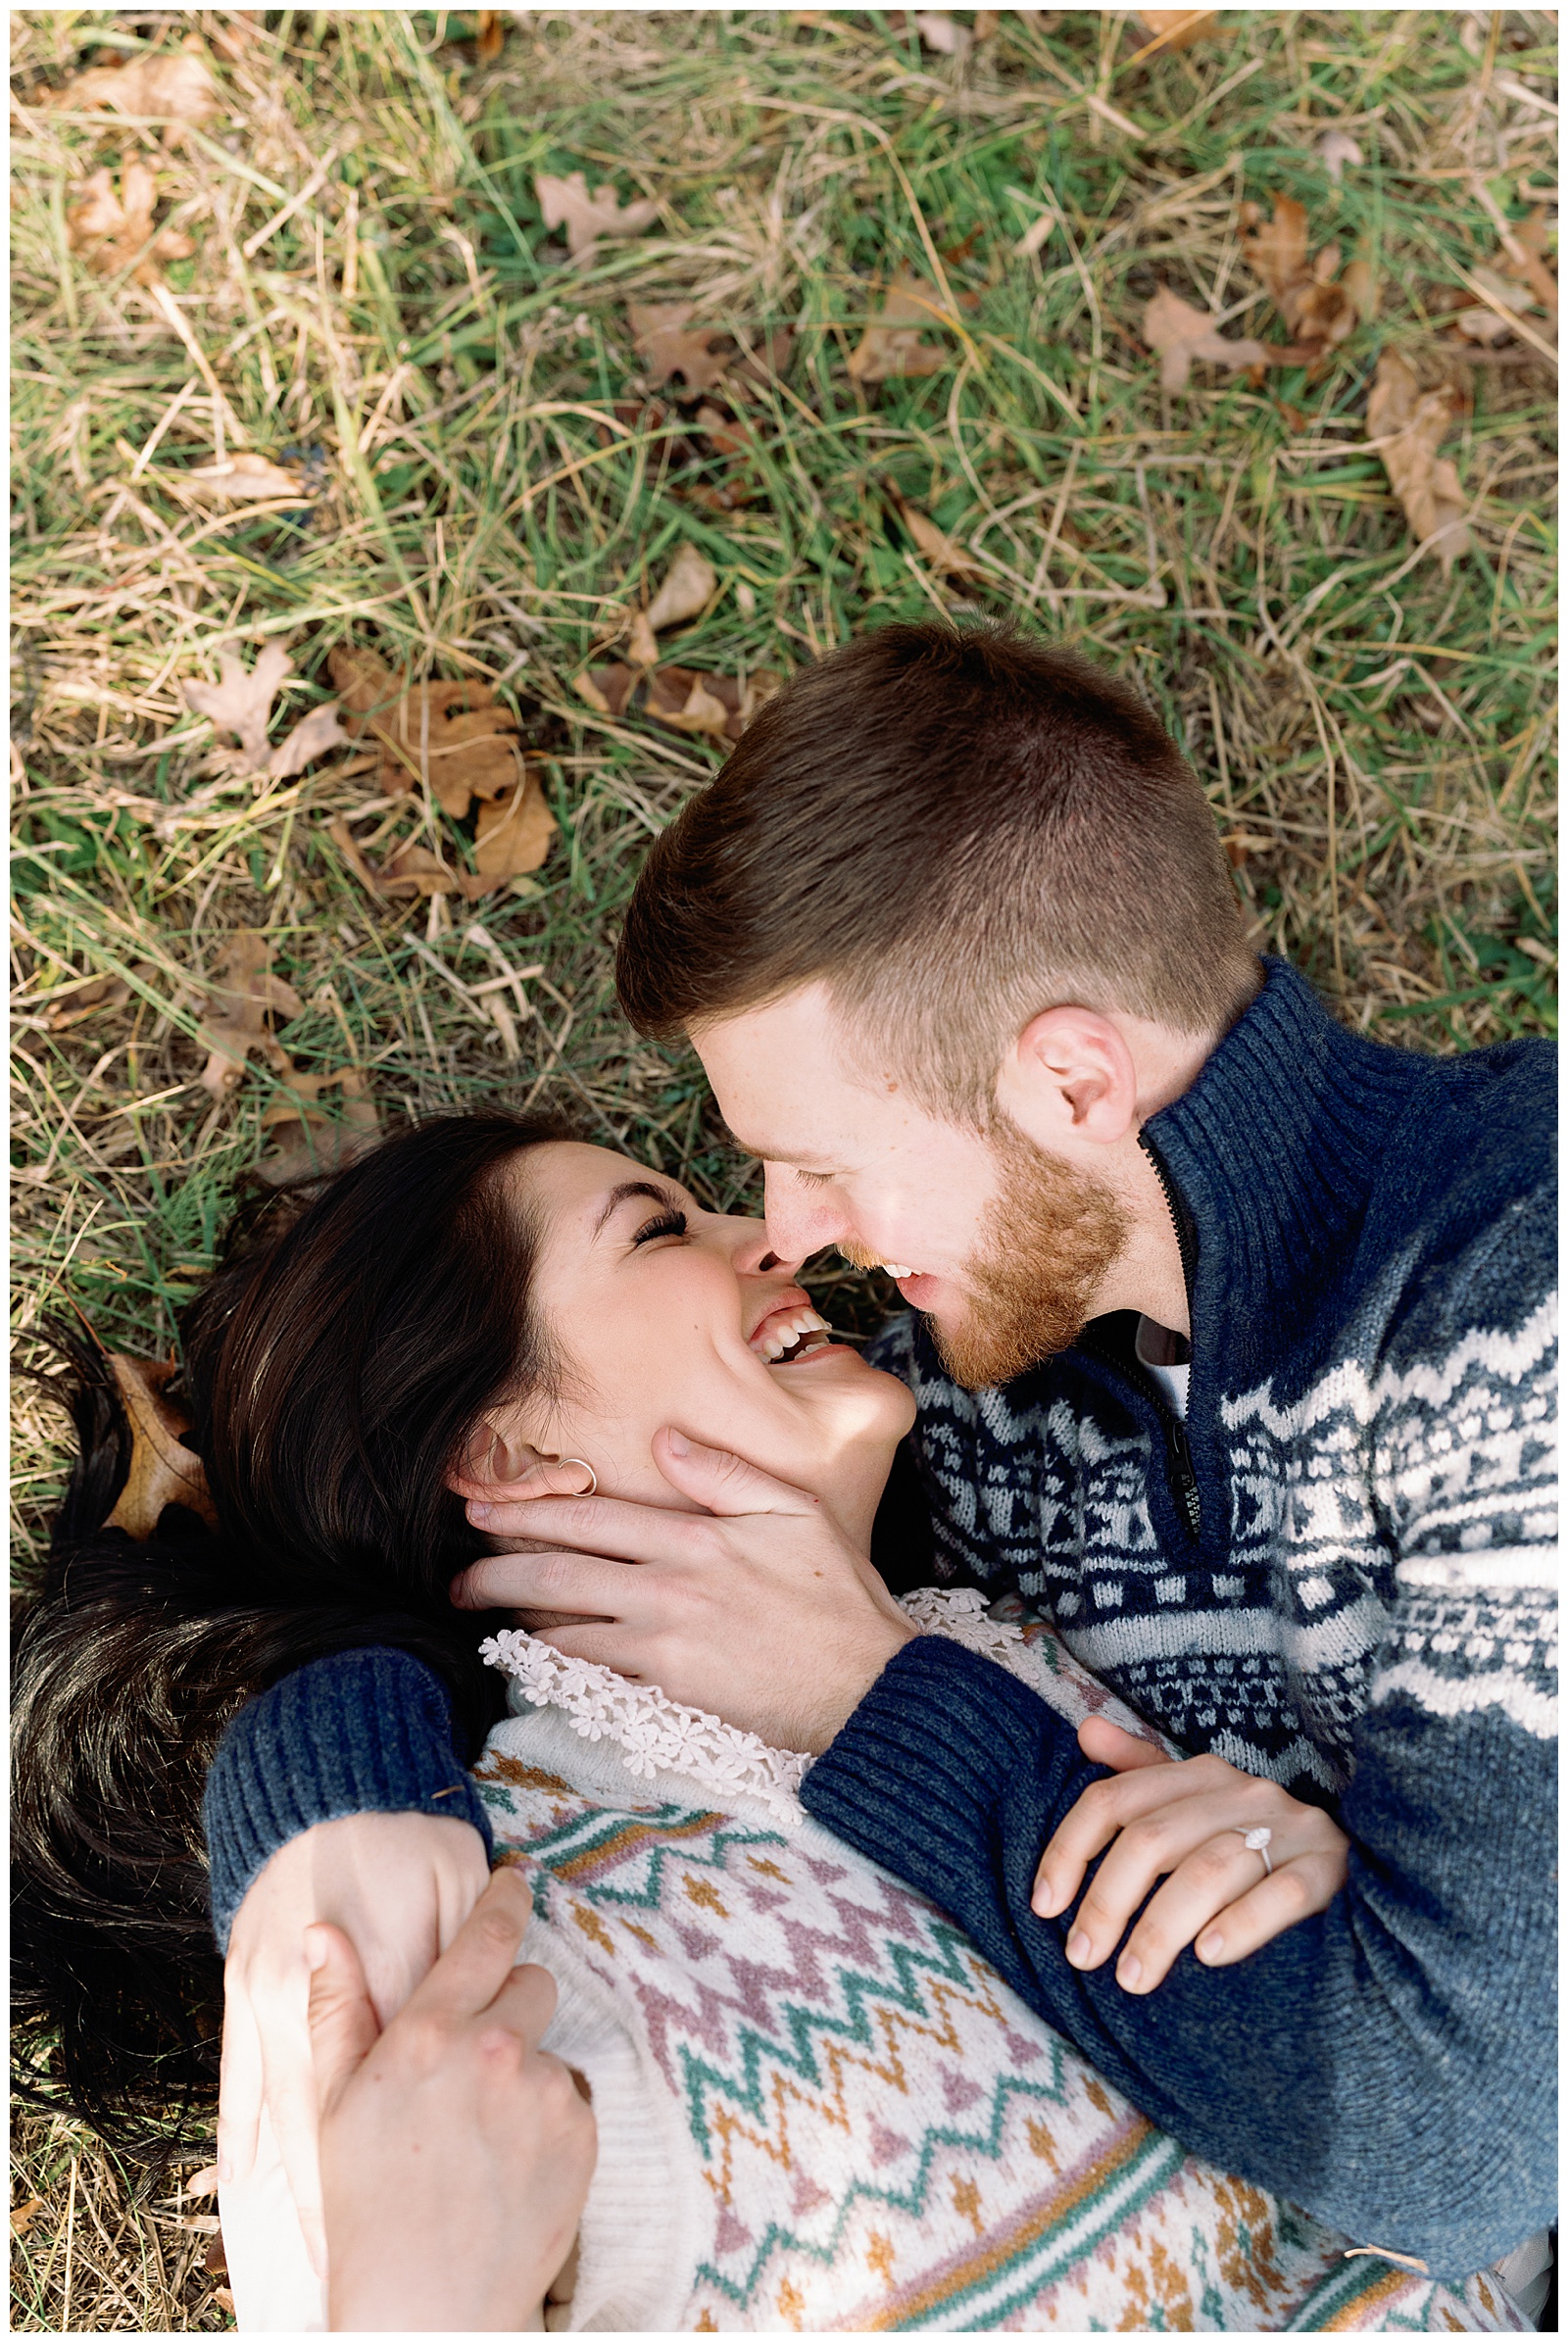 Engaged man and woman lying down and snuggling in a meadow at sunset winter engagement session